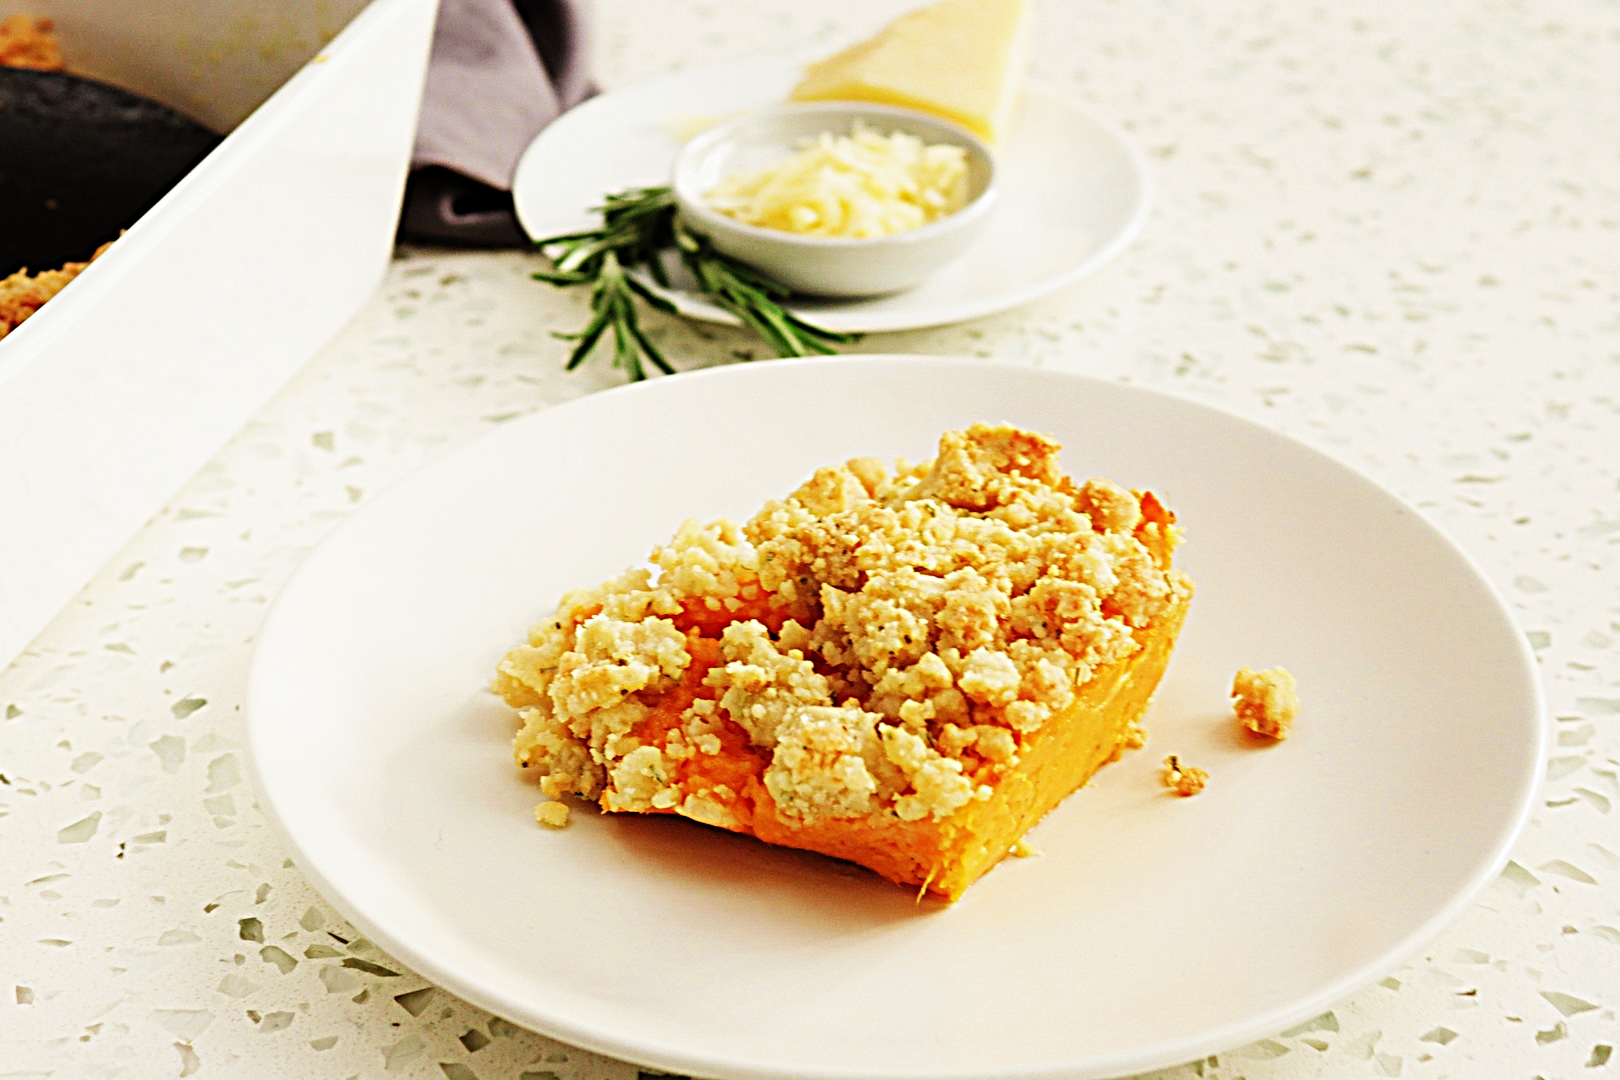 Stupid-Easy Recipe for Savory Sweet Potato Casserole with Parmesan Crumble (#1 Top-Rated)